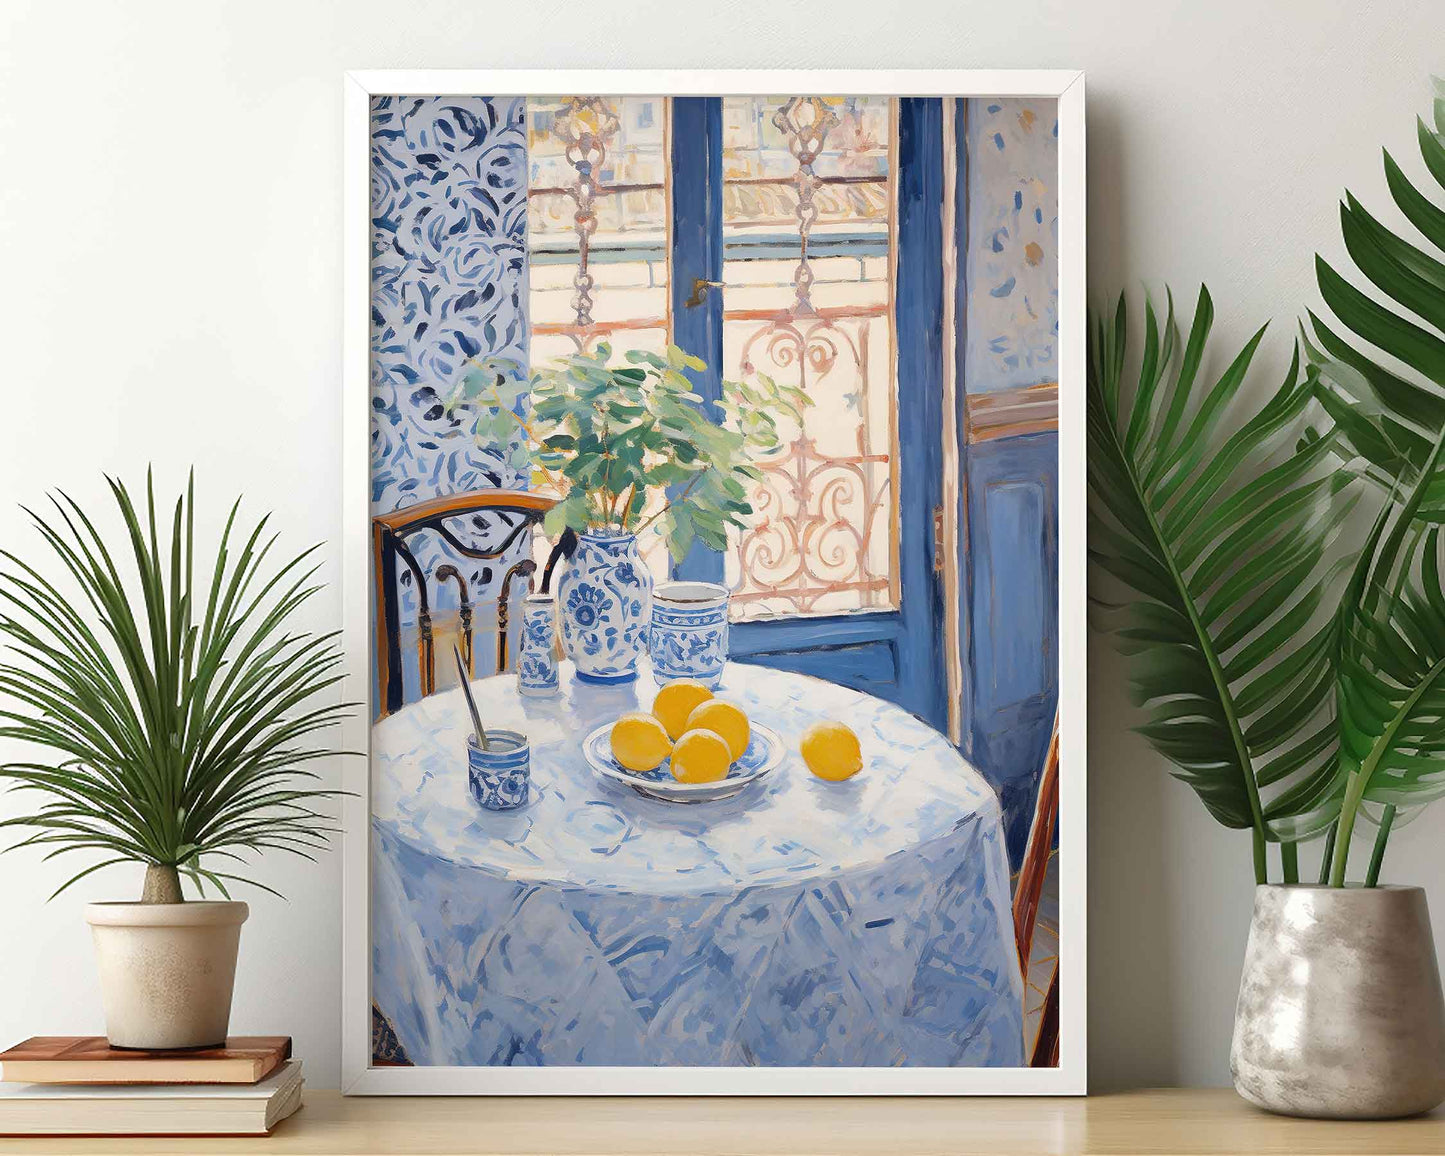 Framed Image of Matisse Style Art Poster Wall Print Oil Paintings Blue Theme